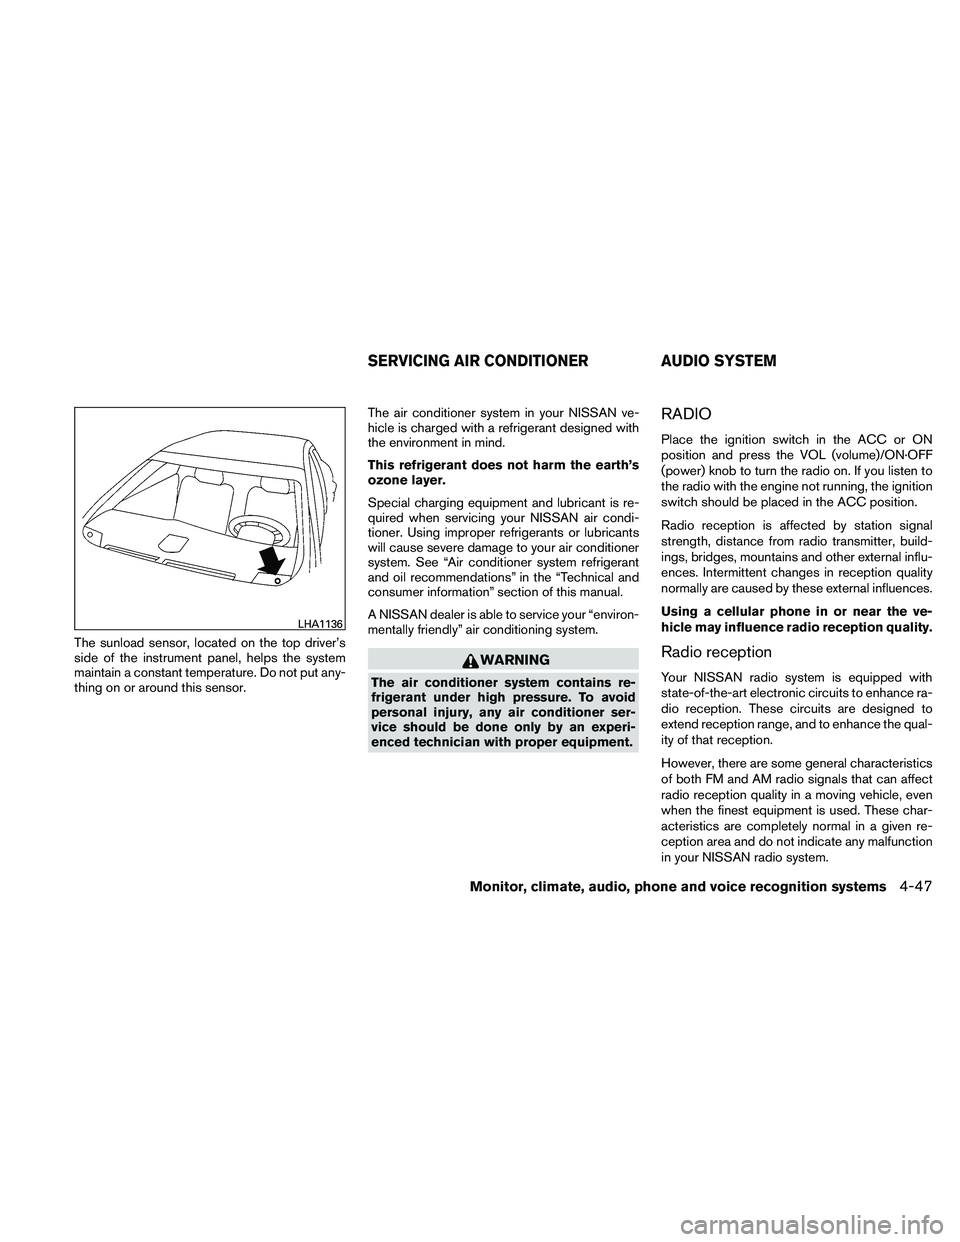 NISSAN MAXIMA 2011  Owner´s Manual The sunload sensor, located on the top driver’s
side of the instrument panel, helps the system
maintain a constant temperature. Do not put any-
thing on or around this sensor.The air conditioner sys